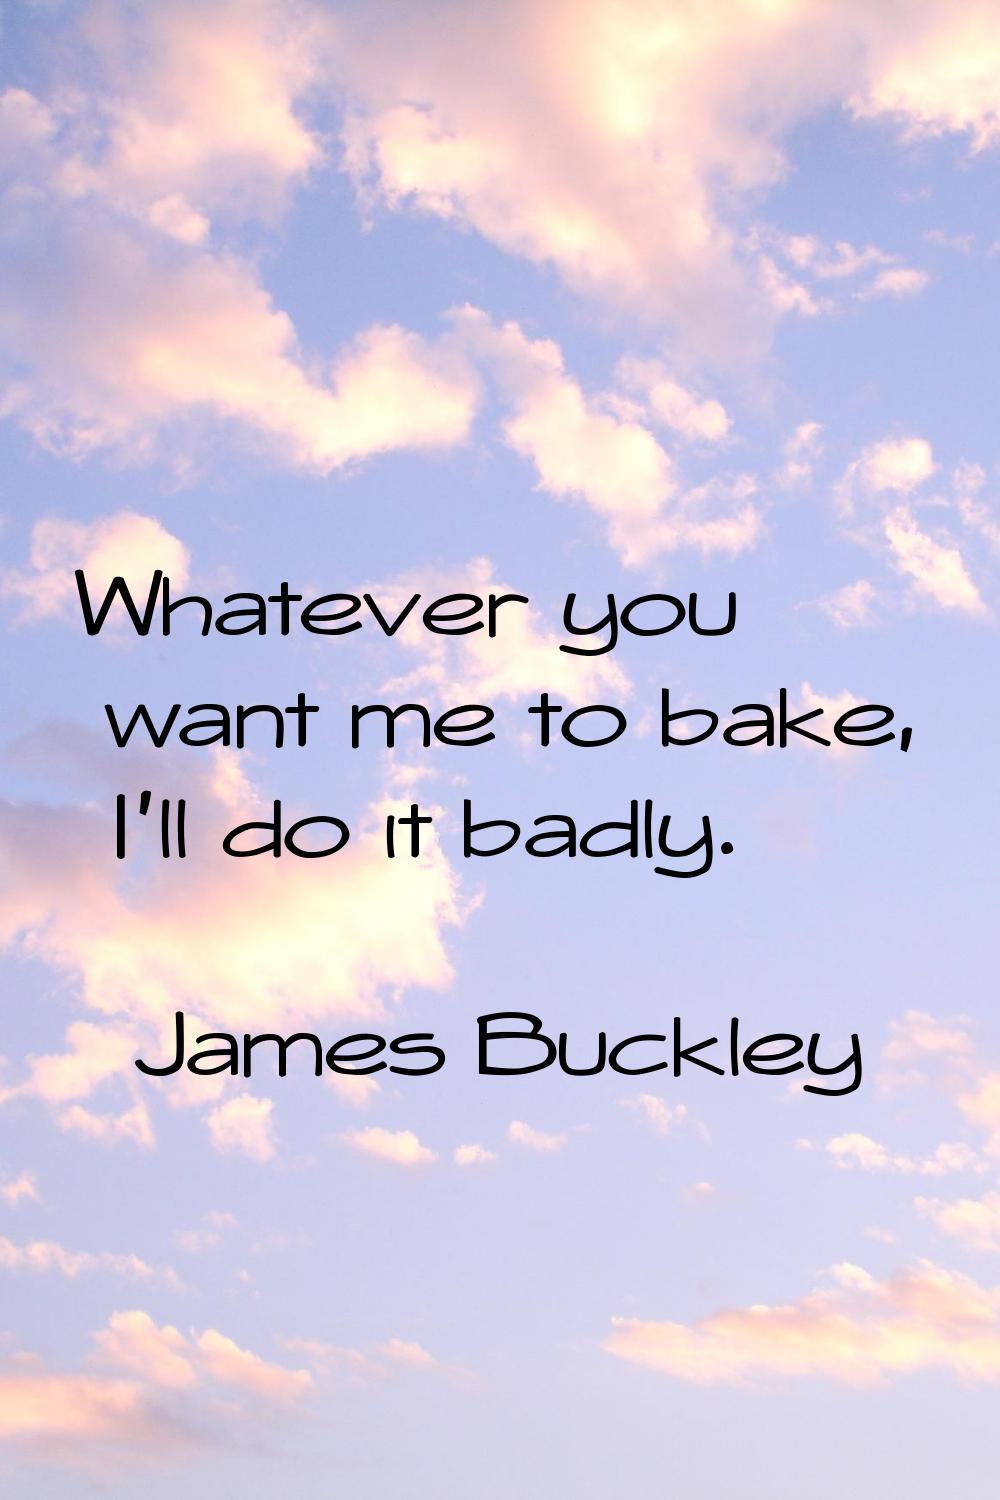 Whatever you want me to bake, I'll do it badly.